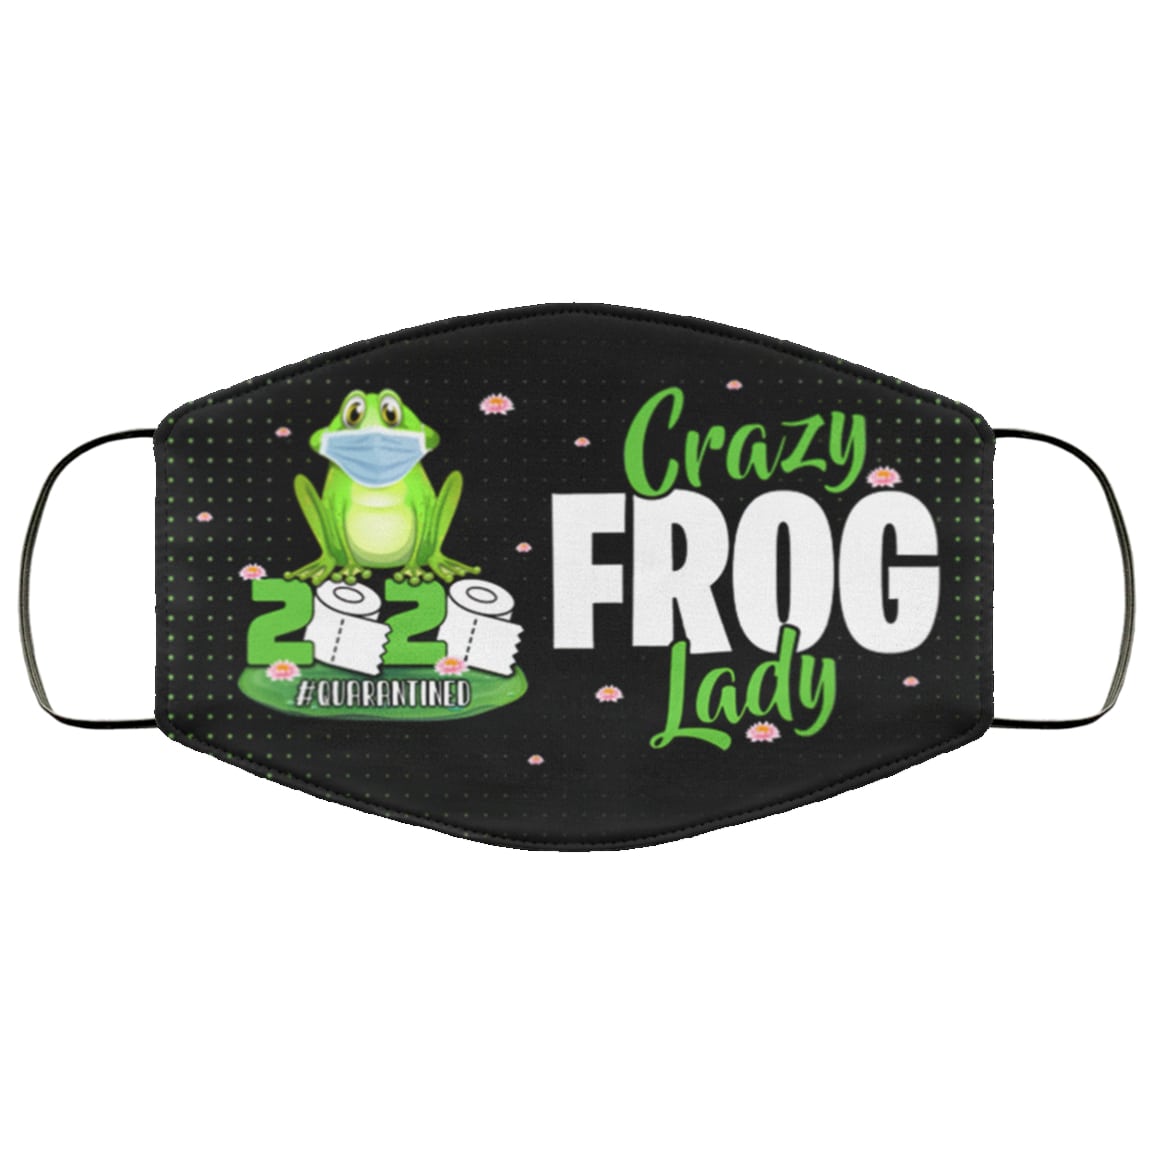 Crazy frog lady 2020 quarantined anti pollution face mask 1